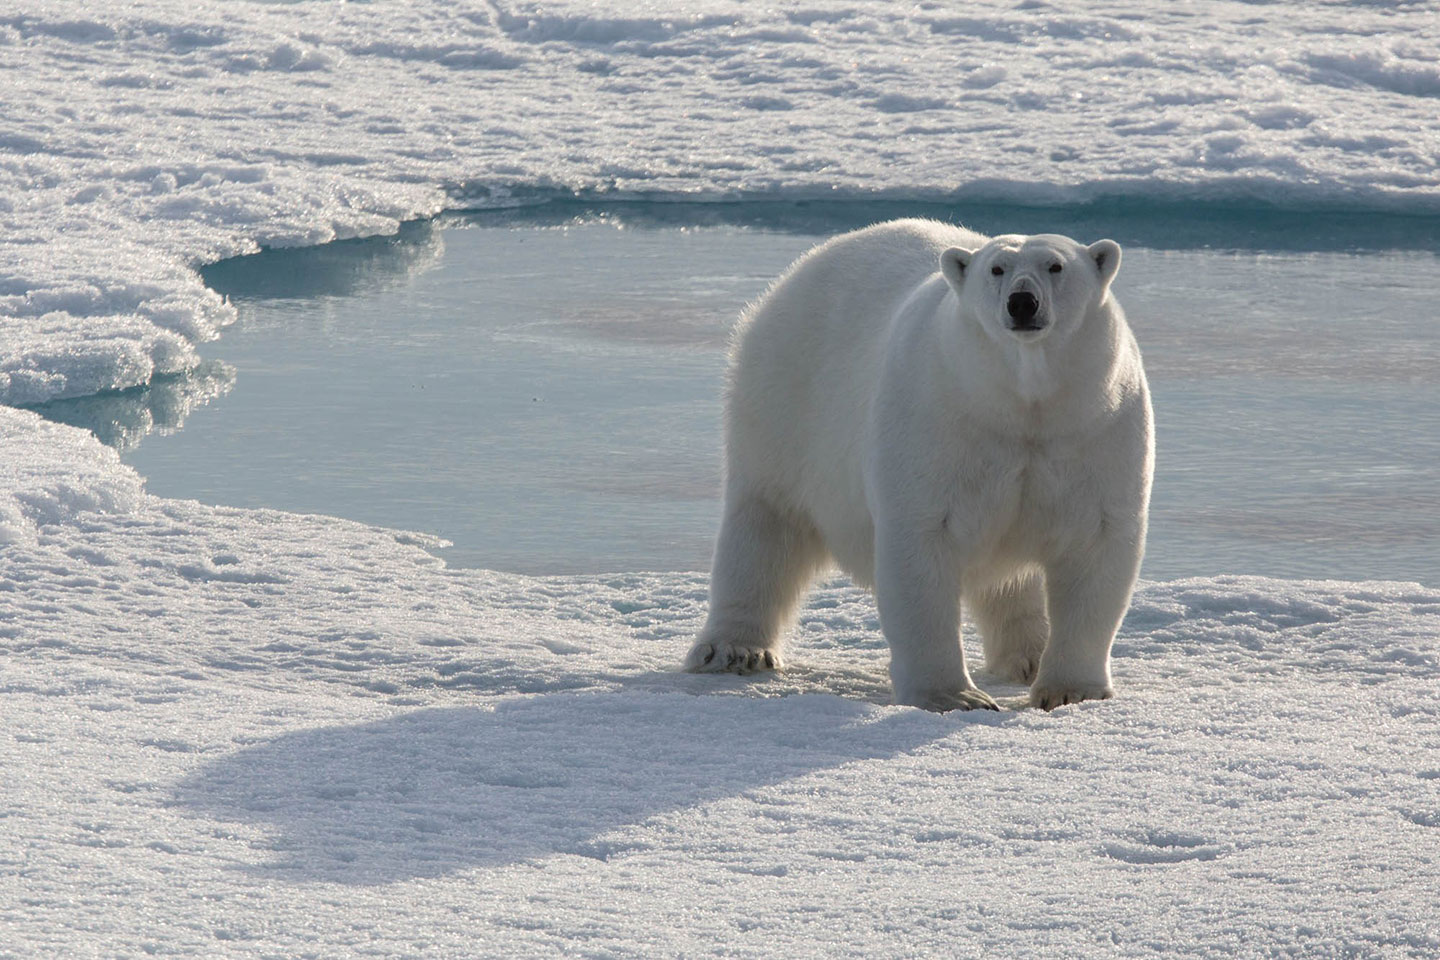 Polar bear sightings lure many wildlife enthusiasts to Arctic regions such as Greenland.